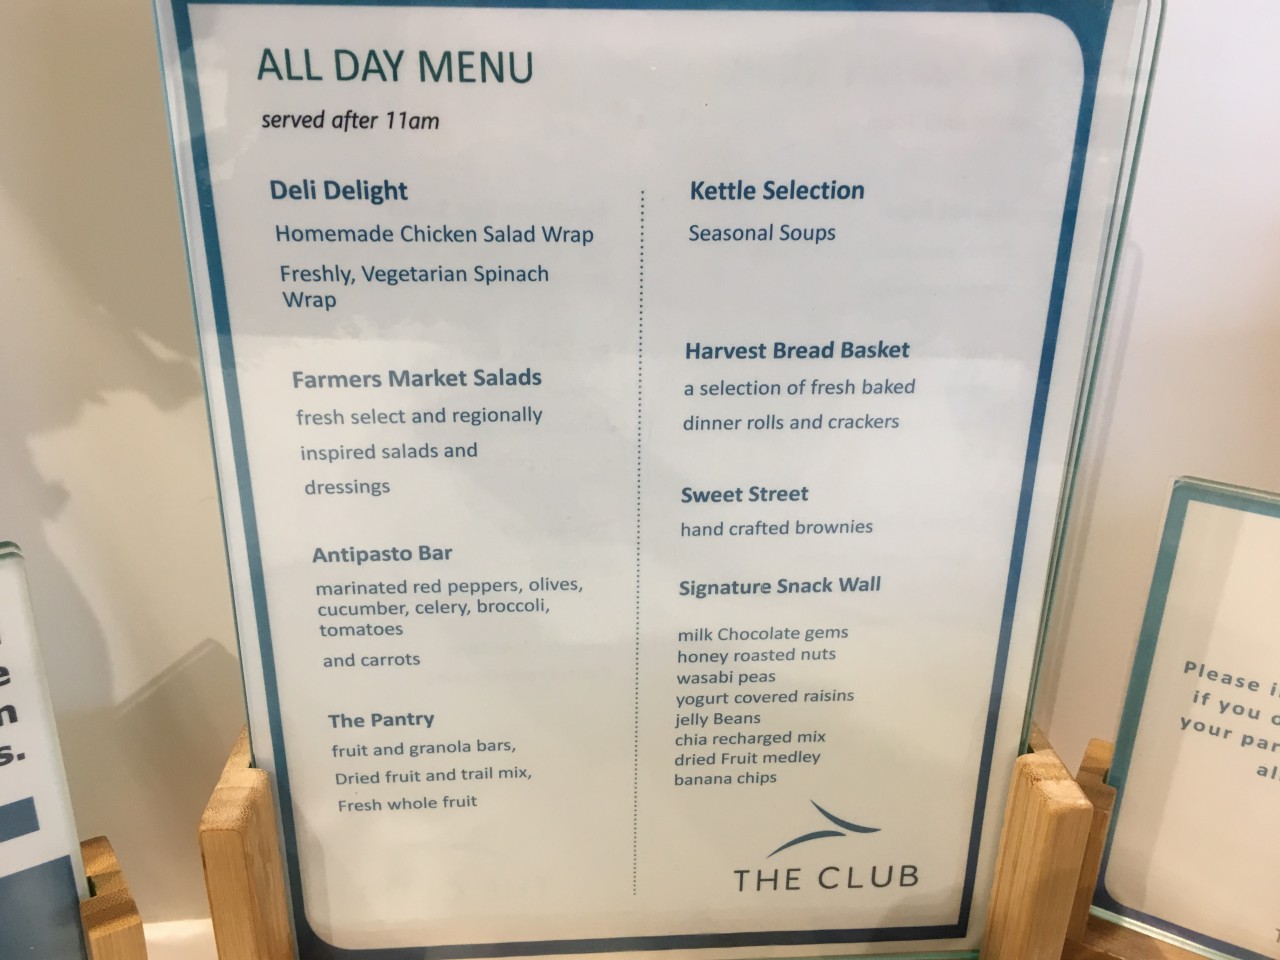 All Day Menu, The Lounge, Boston Airport Review